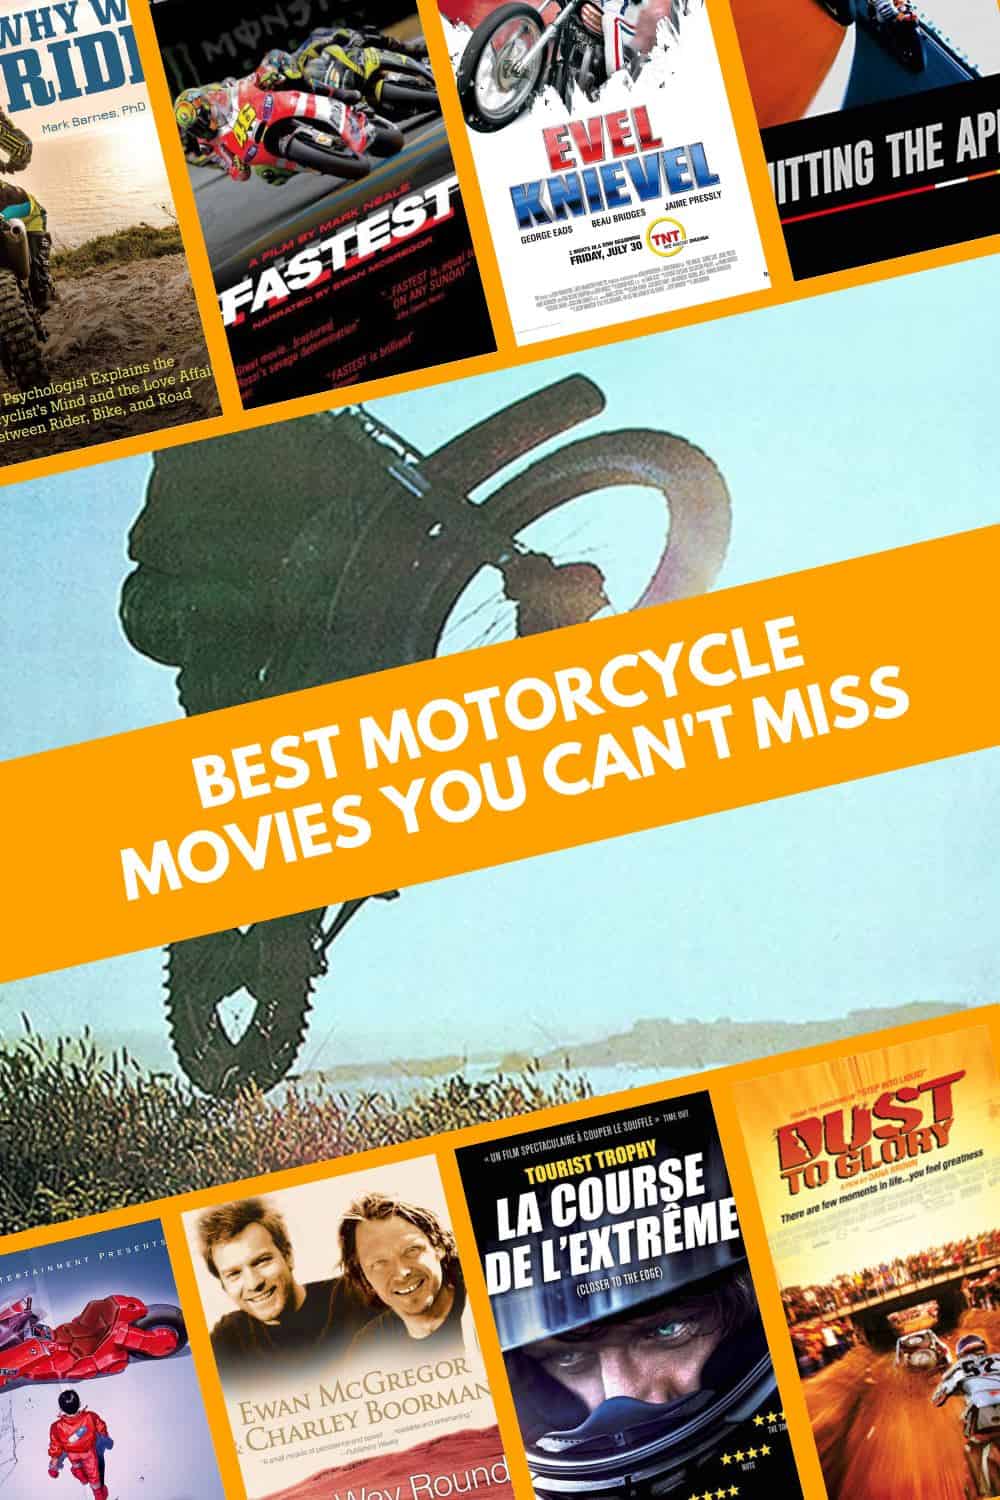 Motorcycle Movies You Can't Miss